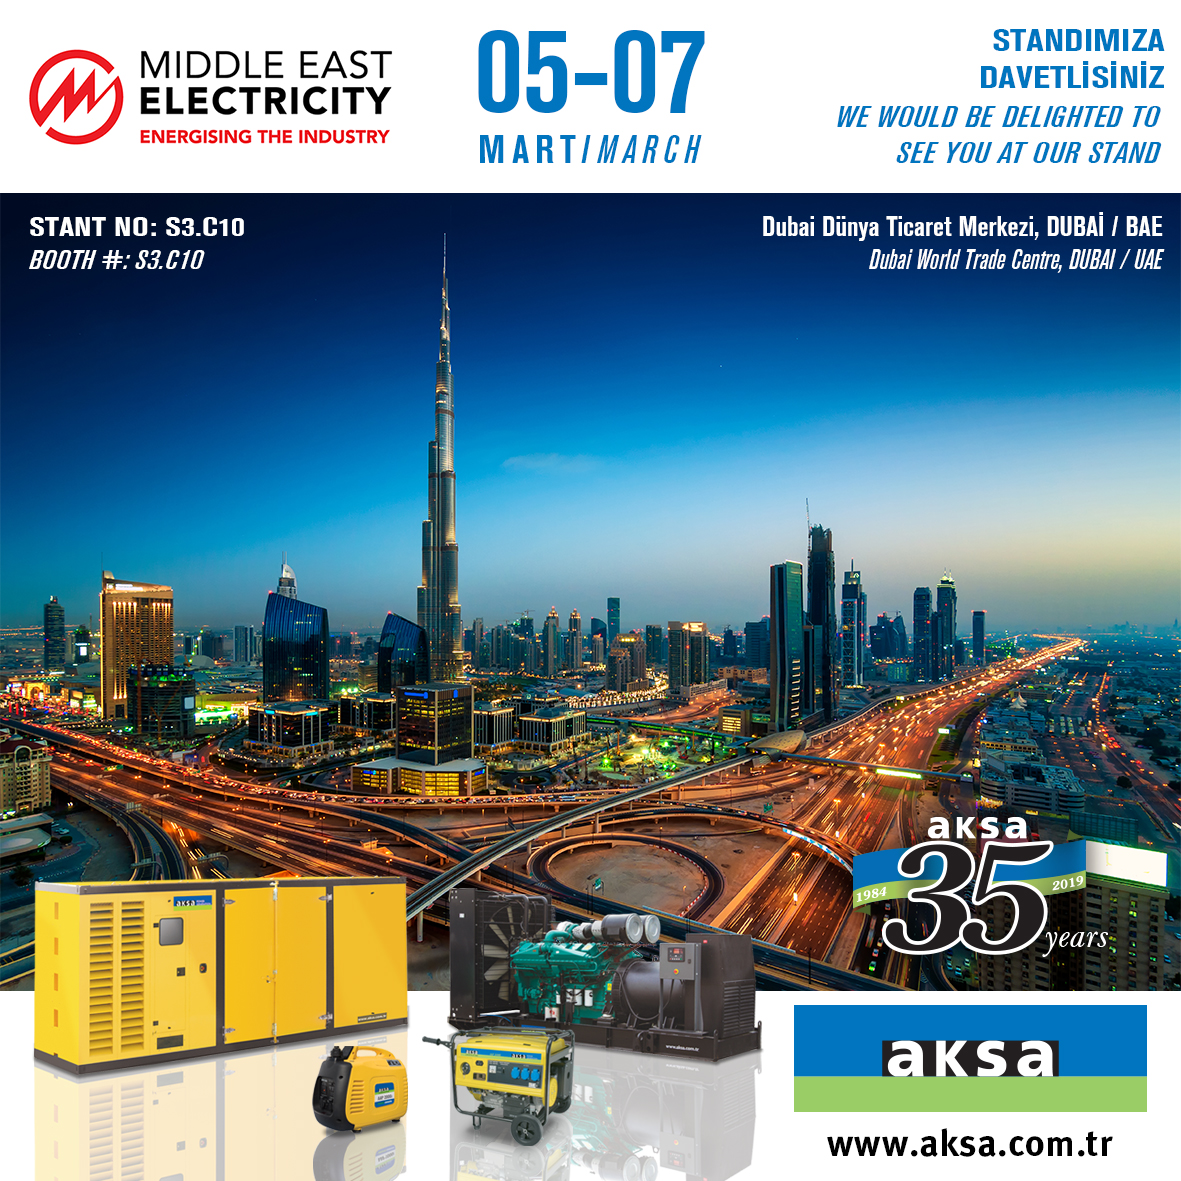 MIDDLE EAST ELECTRICITY 2019